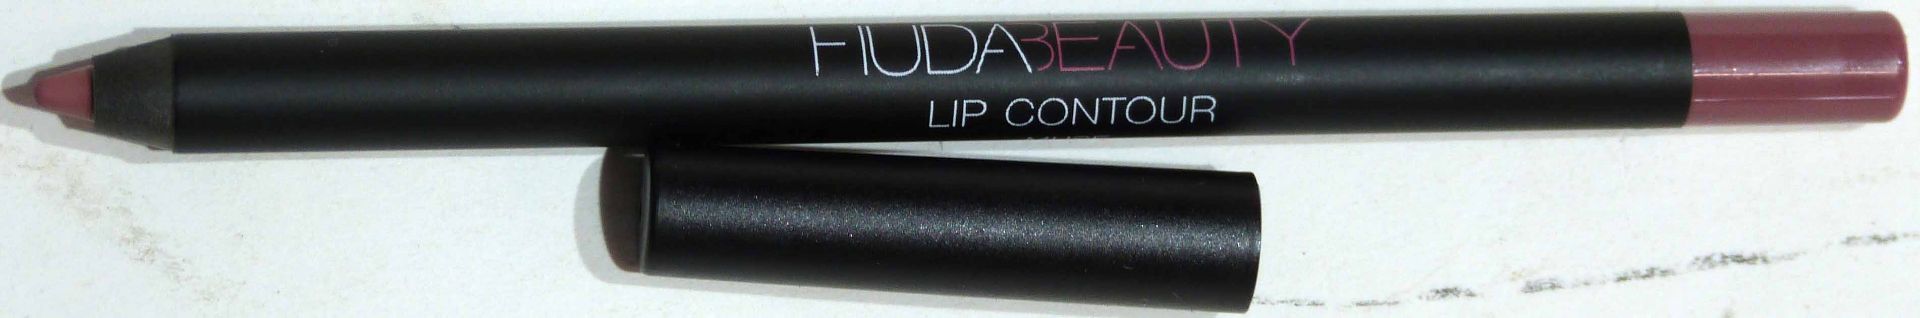 Huda Beauty Contour and Strobe Lip Set. (10 in lot) - Image 13 of 13